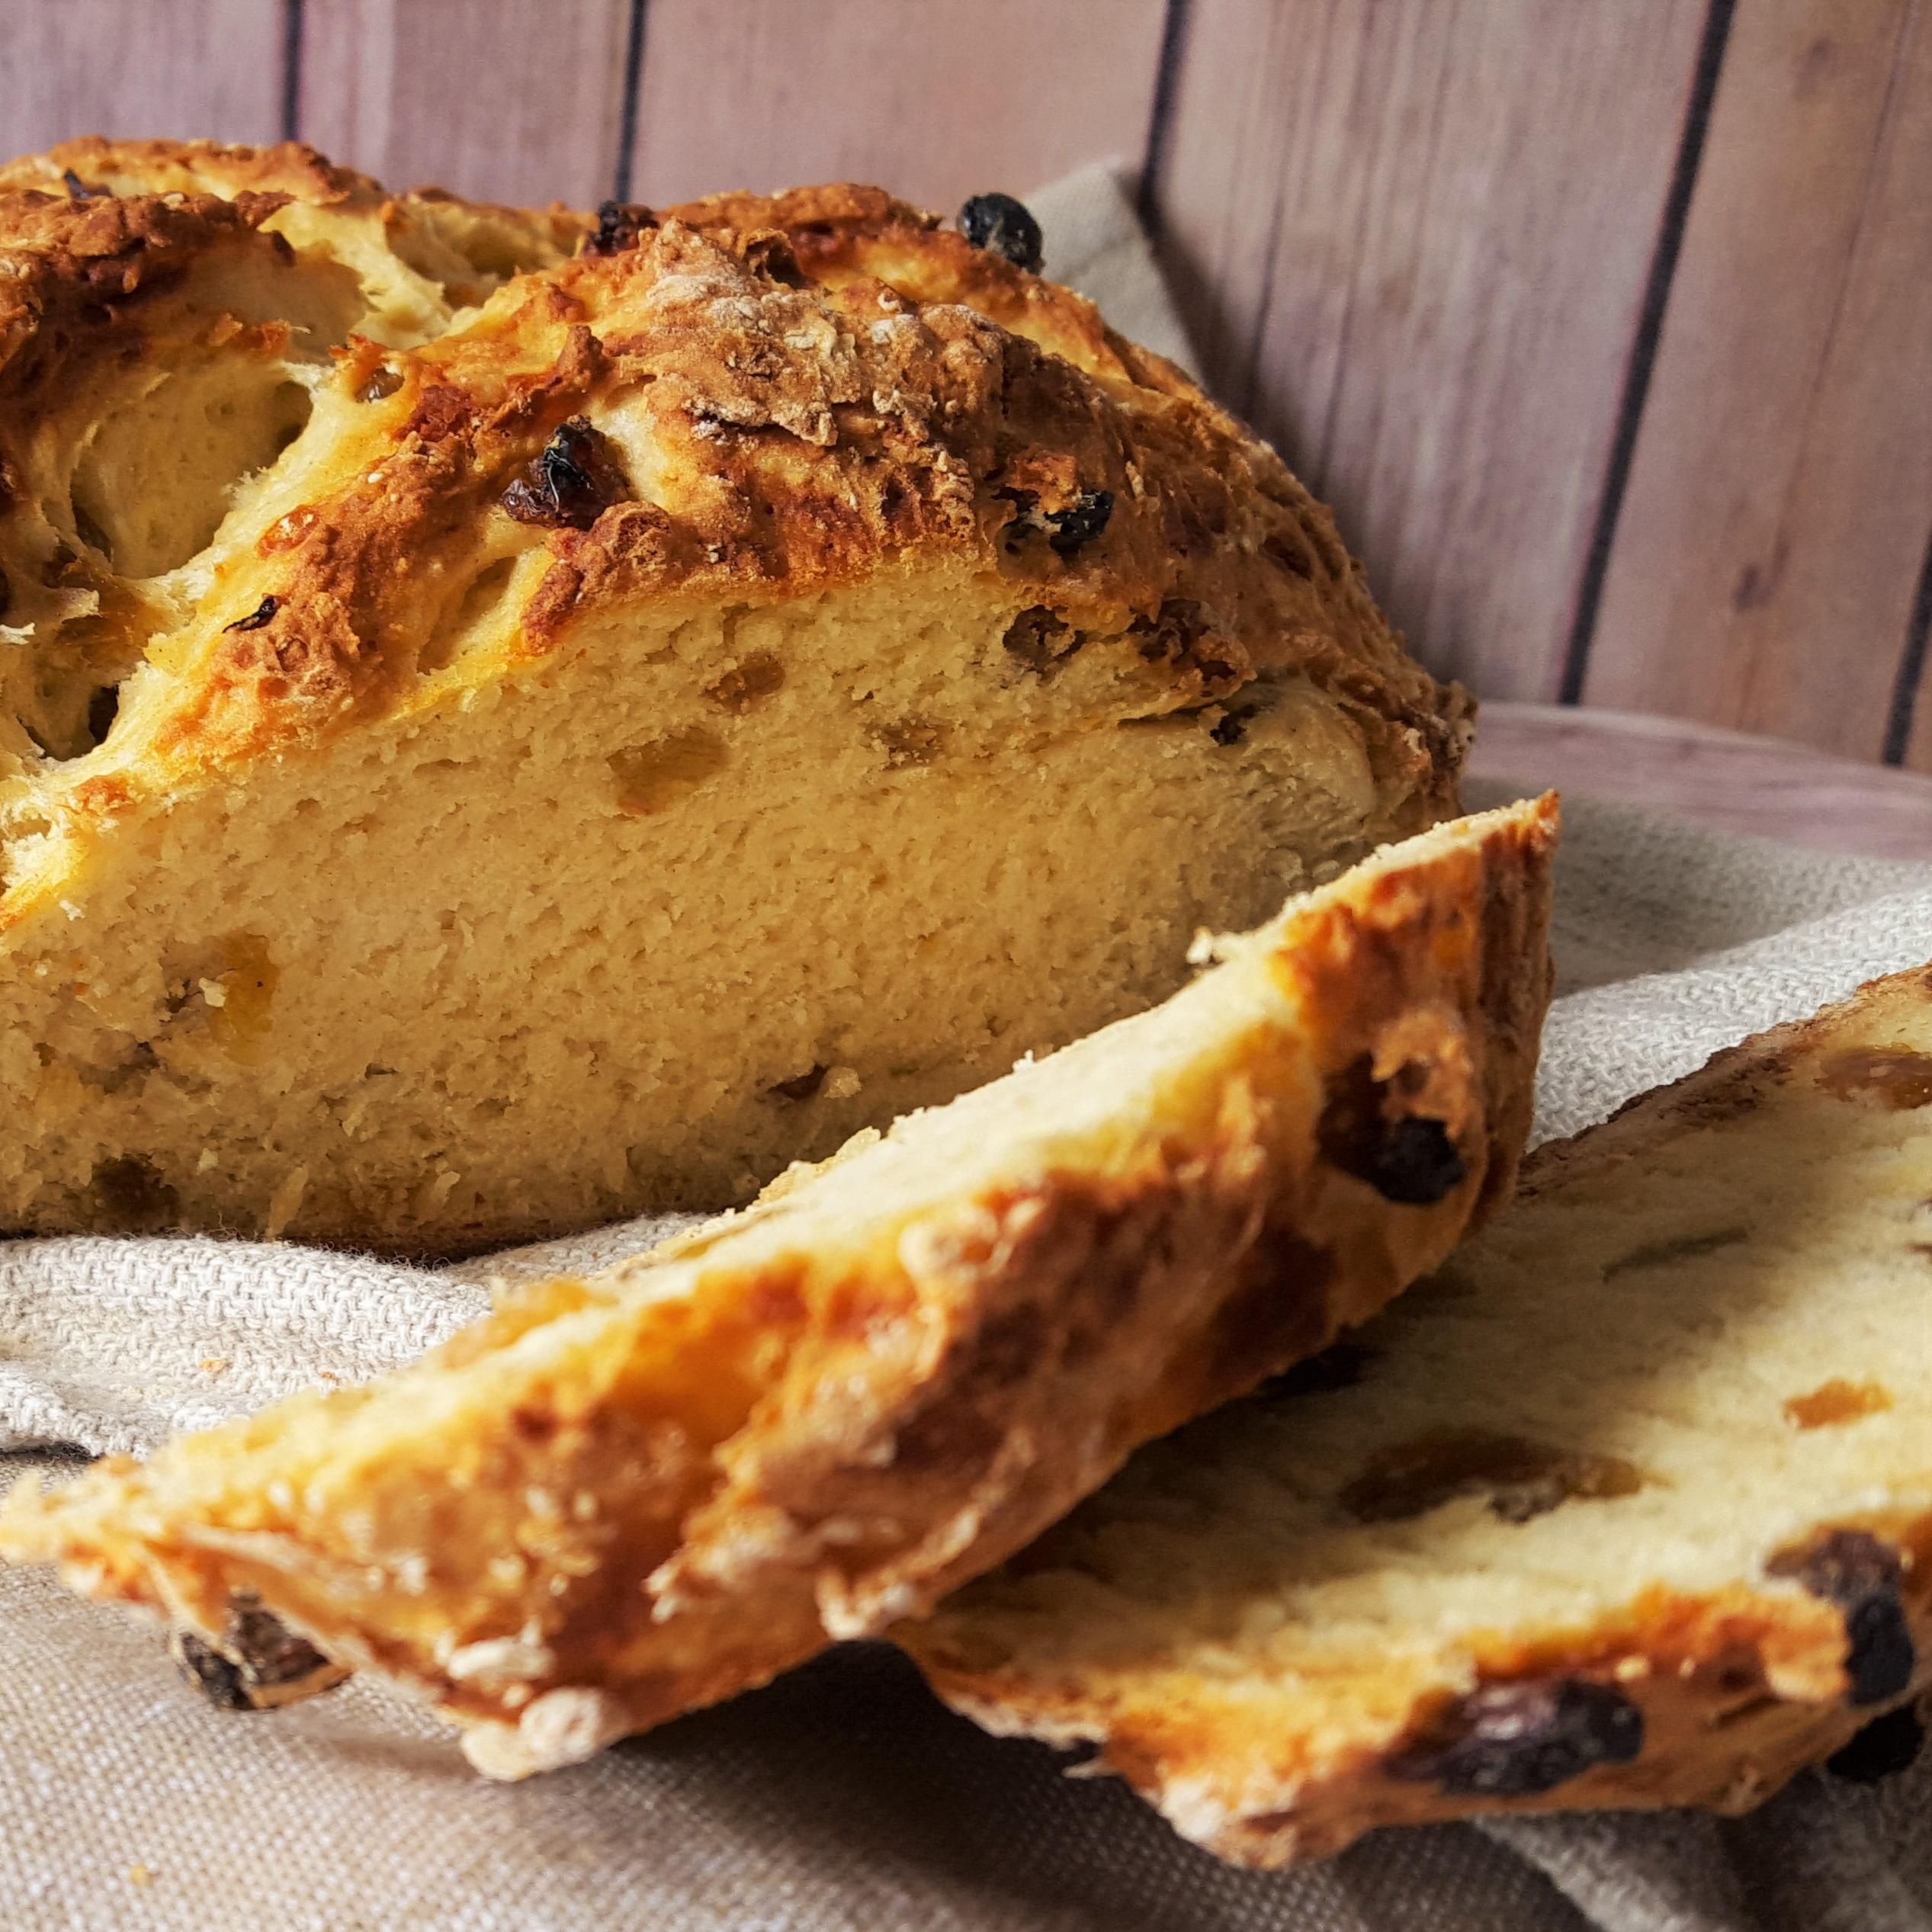  The golden brown crust of Chrissy's Irish Soda Bread is so inviting